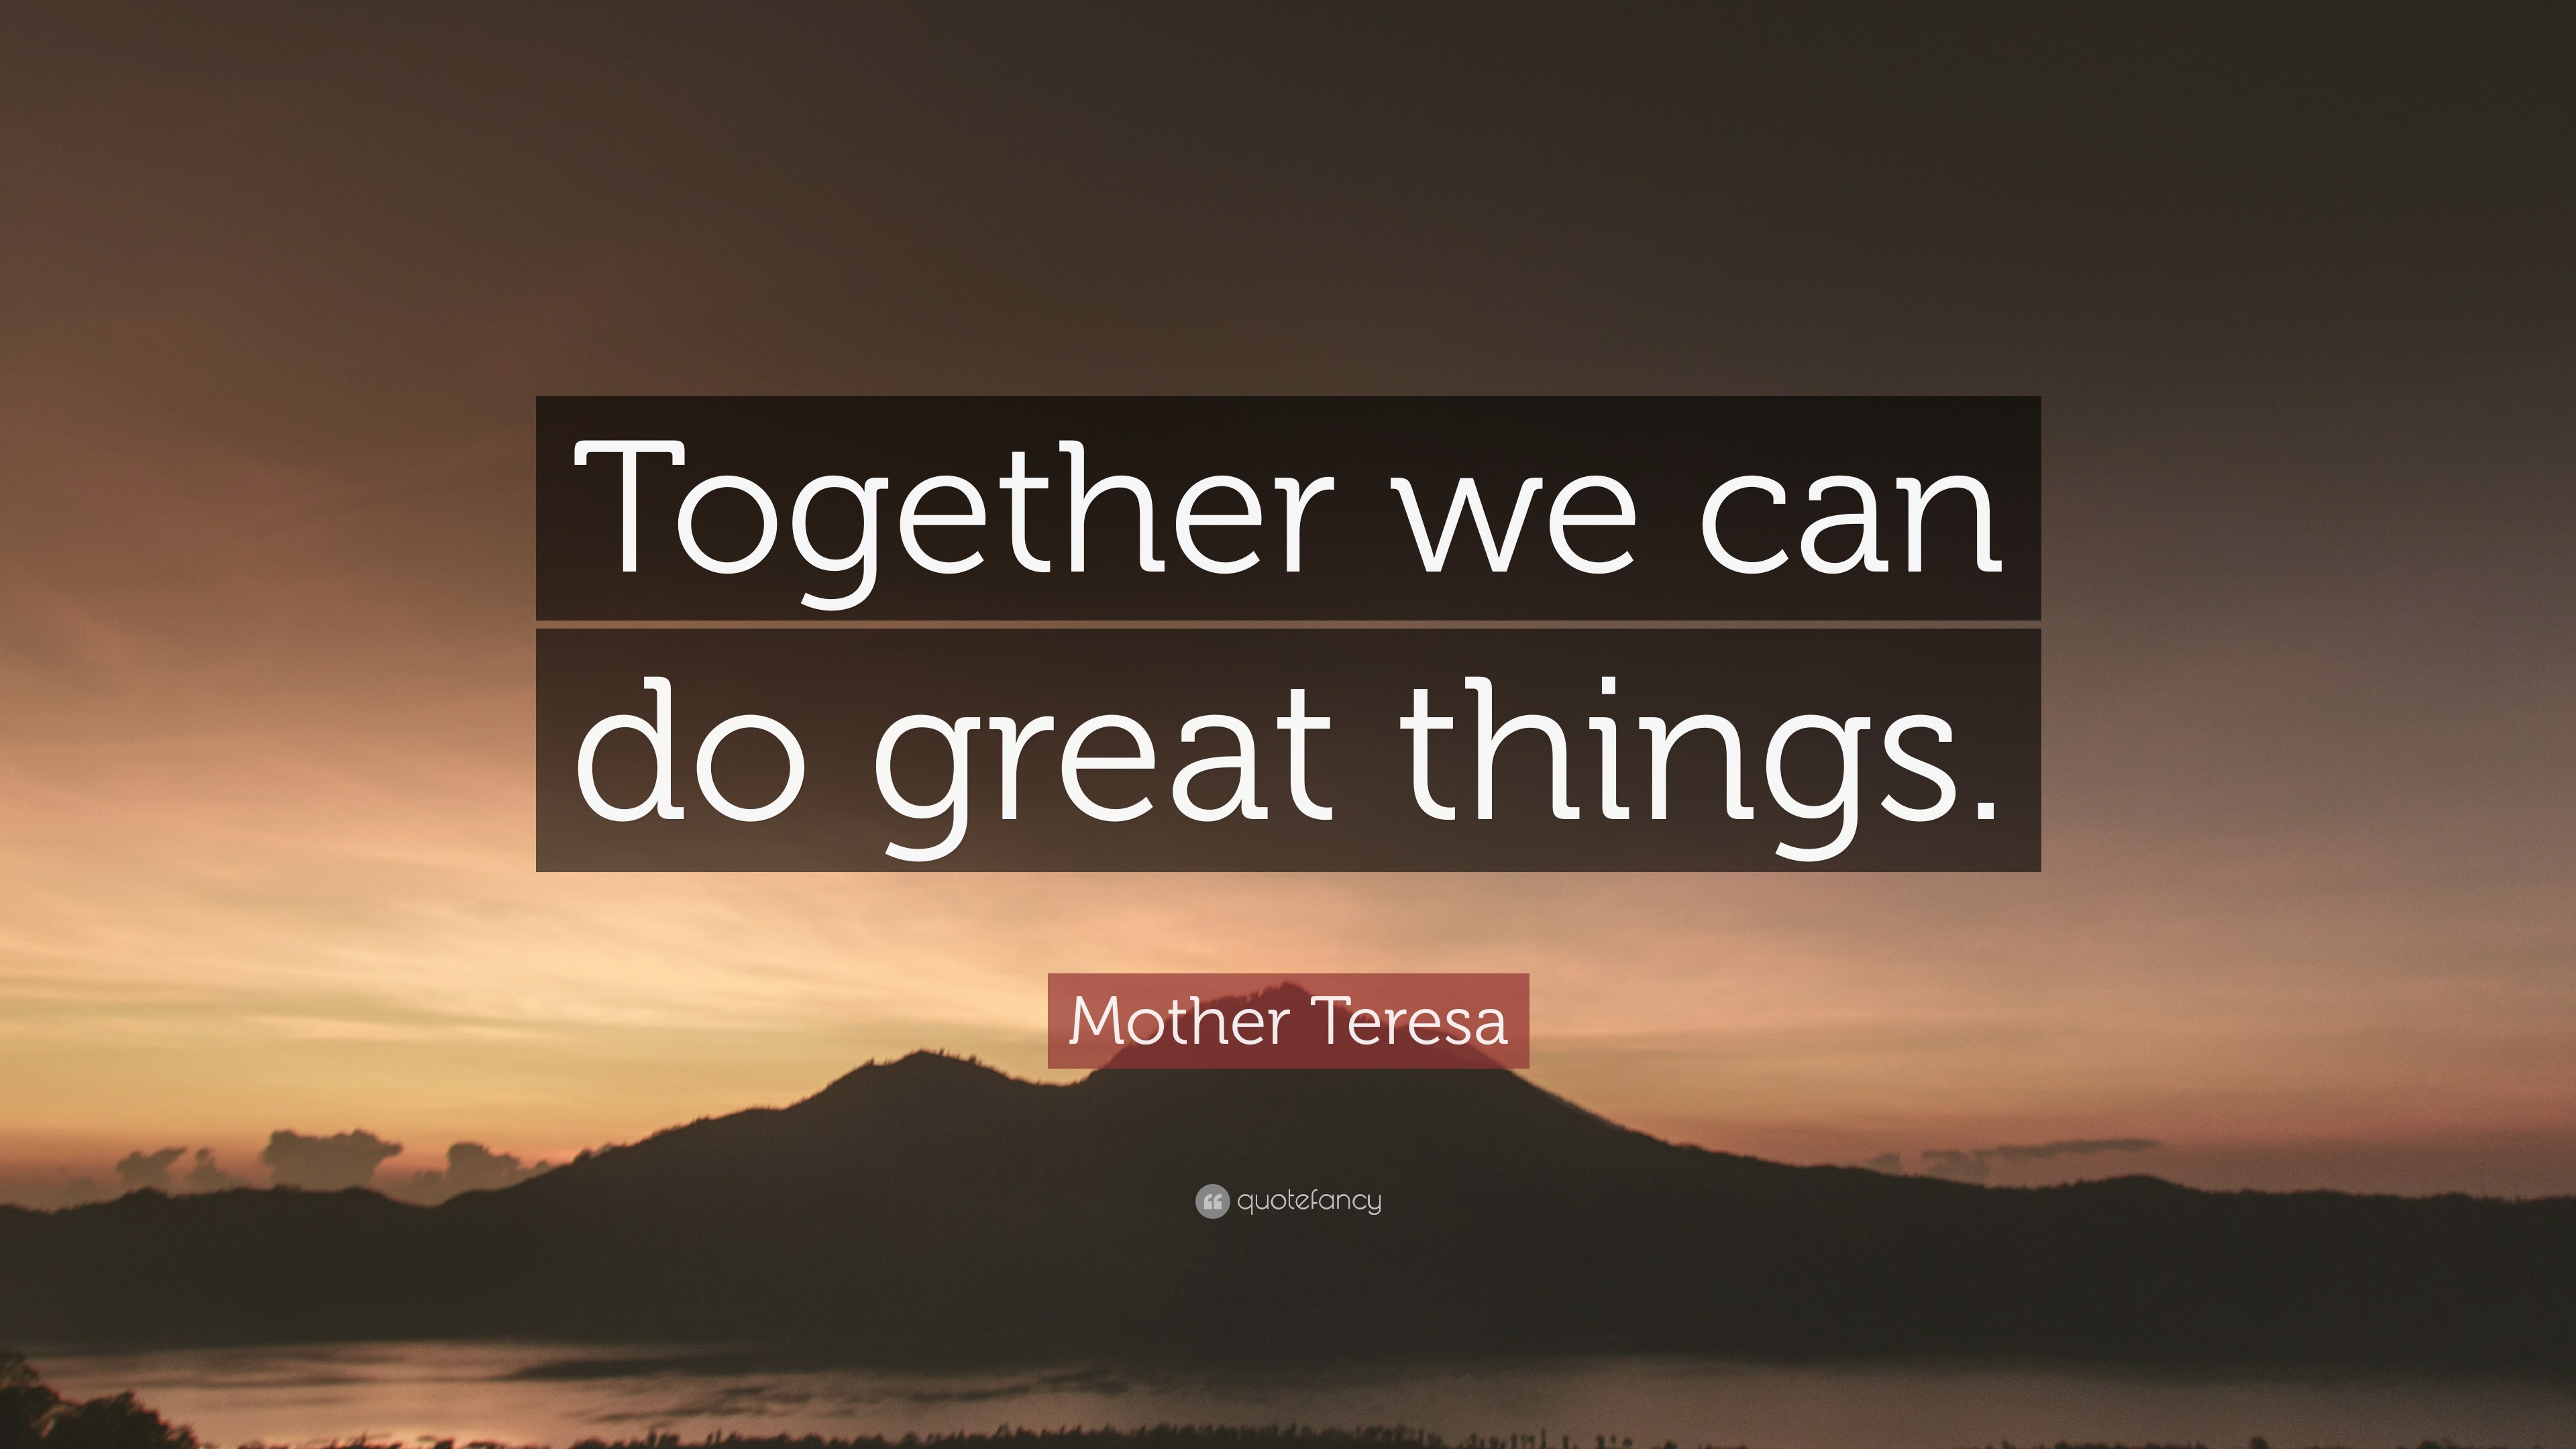 Mother Teresa Quote: “Together we can do great things.”